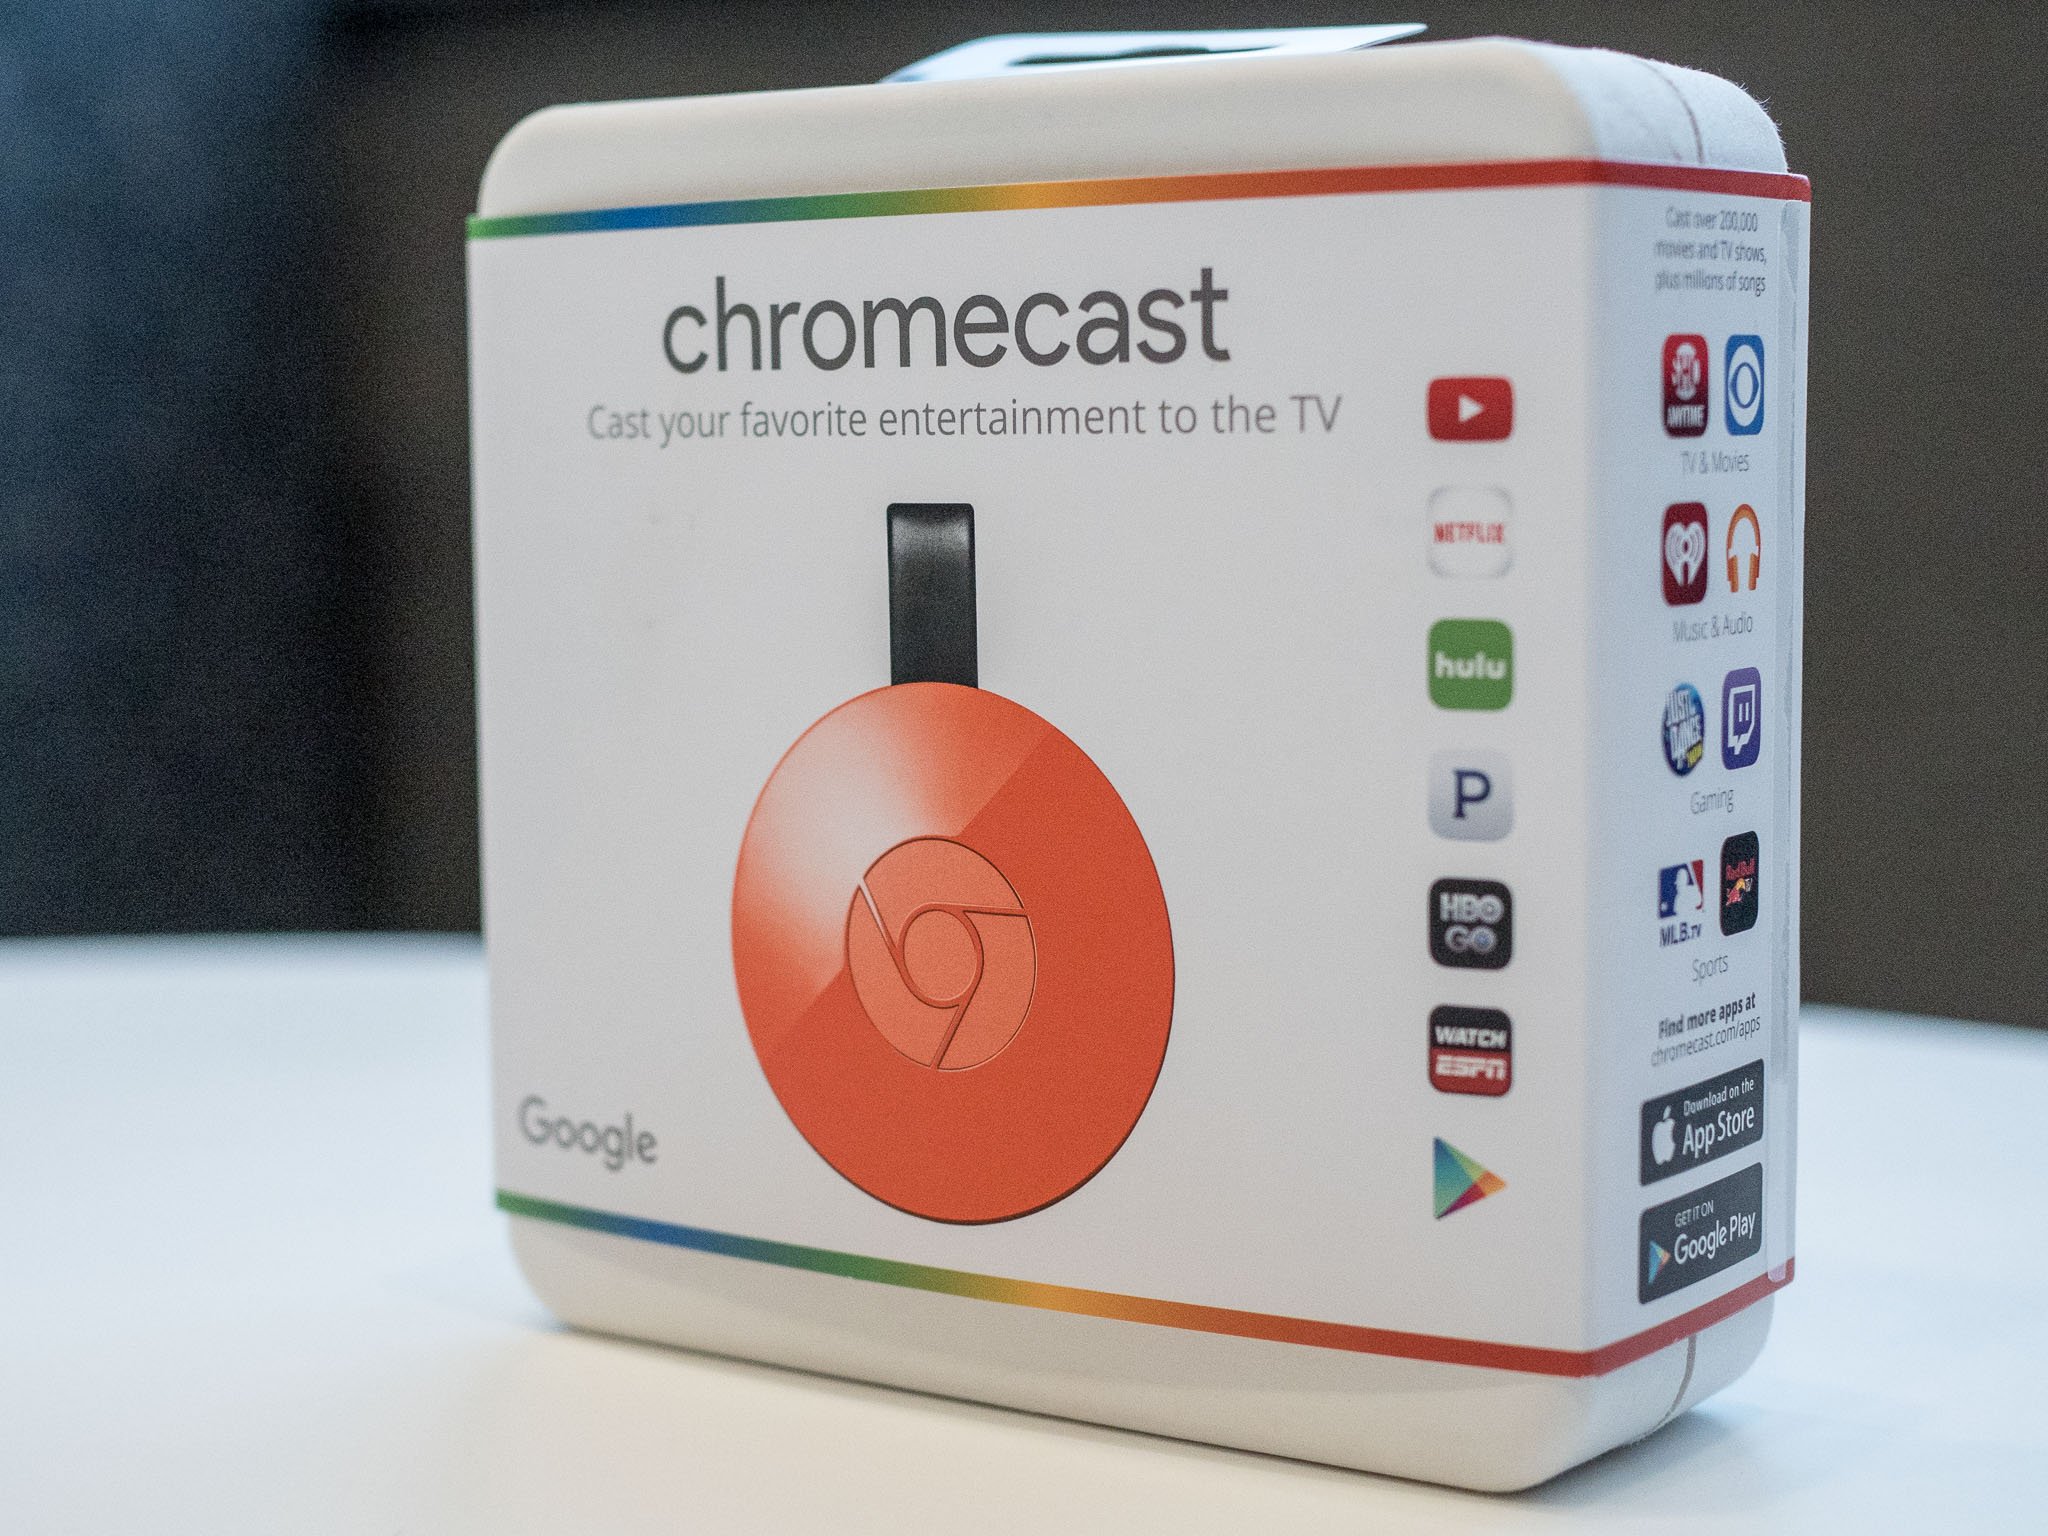 First look at the new Chromecast Android Central